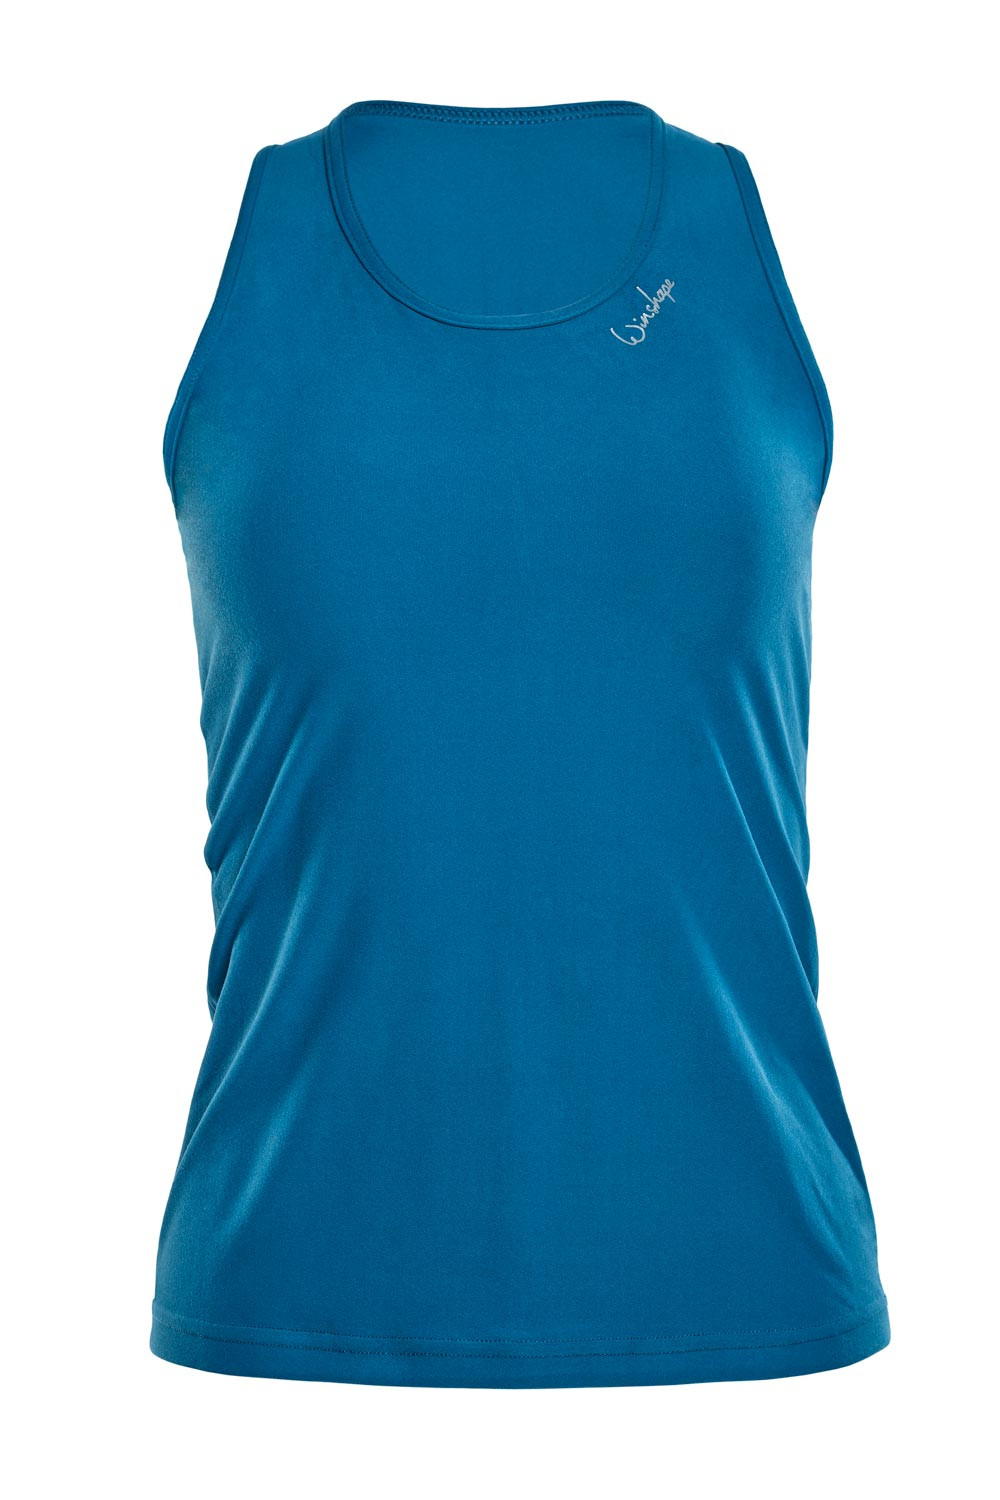 Functional Light and Soft teal Style green, Ultra AET124LS, Winshape Tanktop Soft